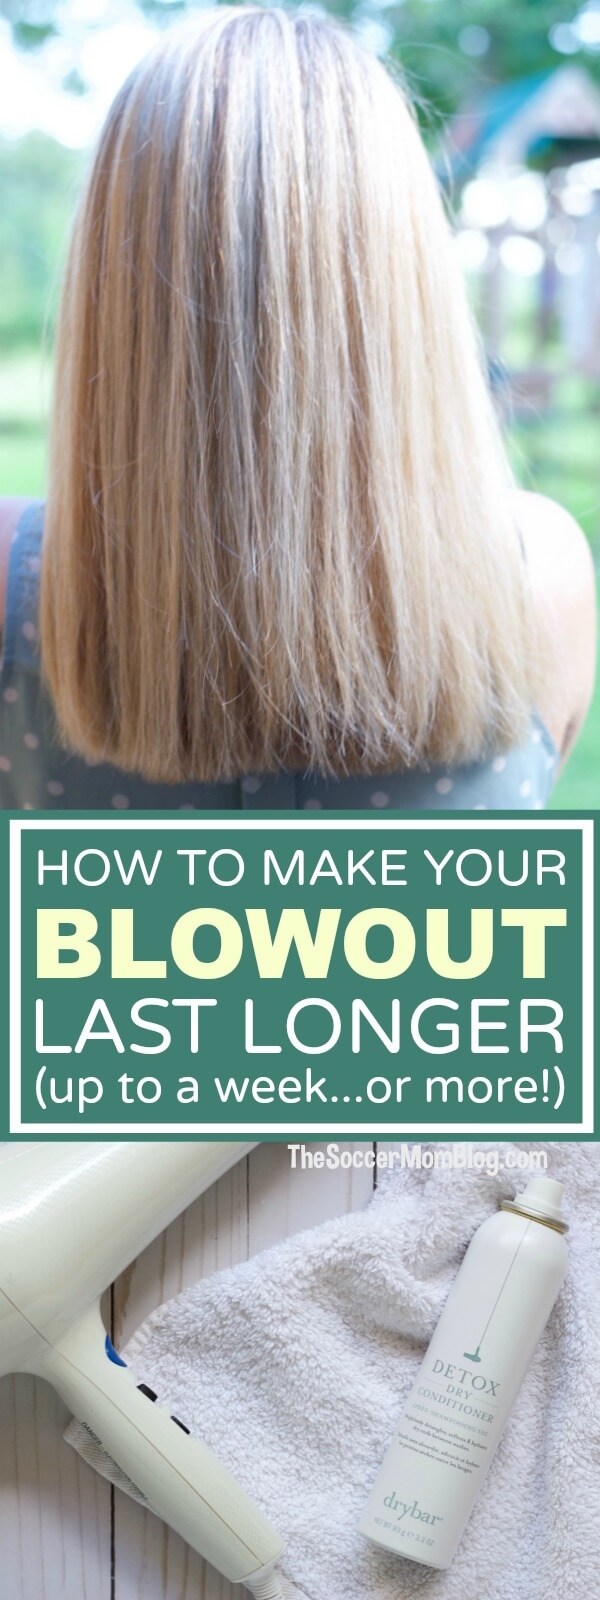 With these 6 hair hacks you'll be able to go longer between washes, keep your hair healthier, and make your blowout last longer, and be styled in seconds!